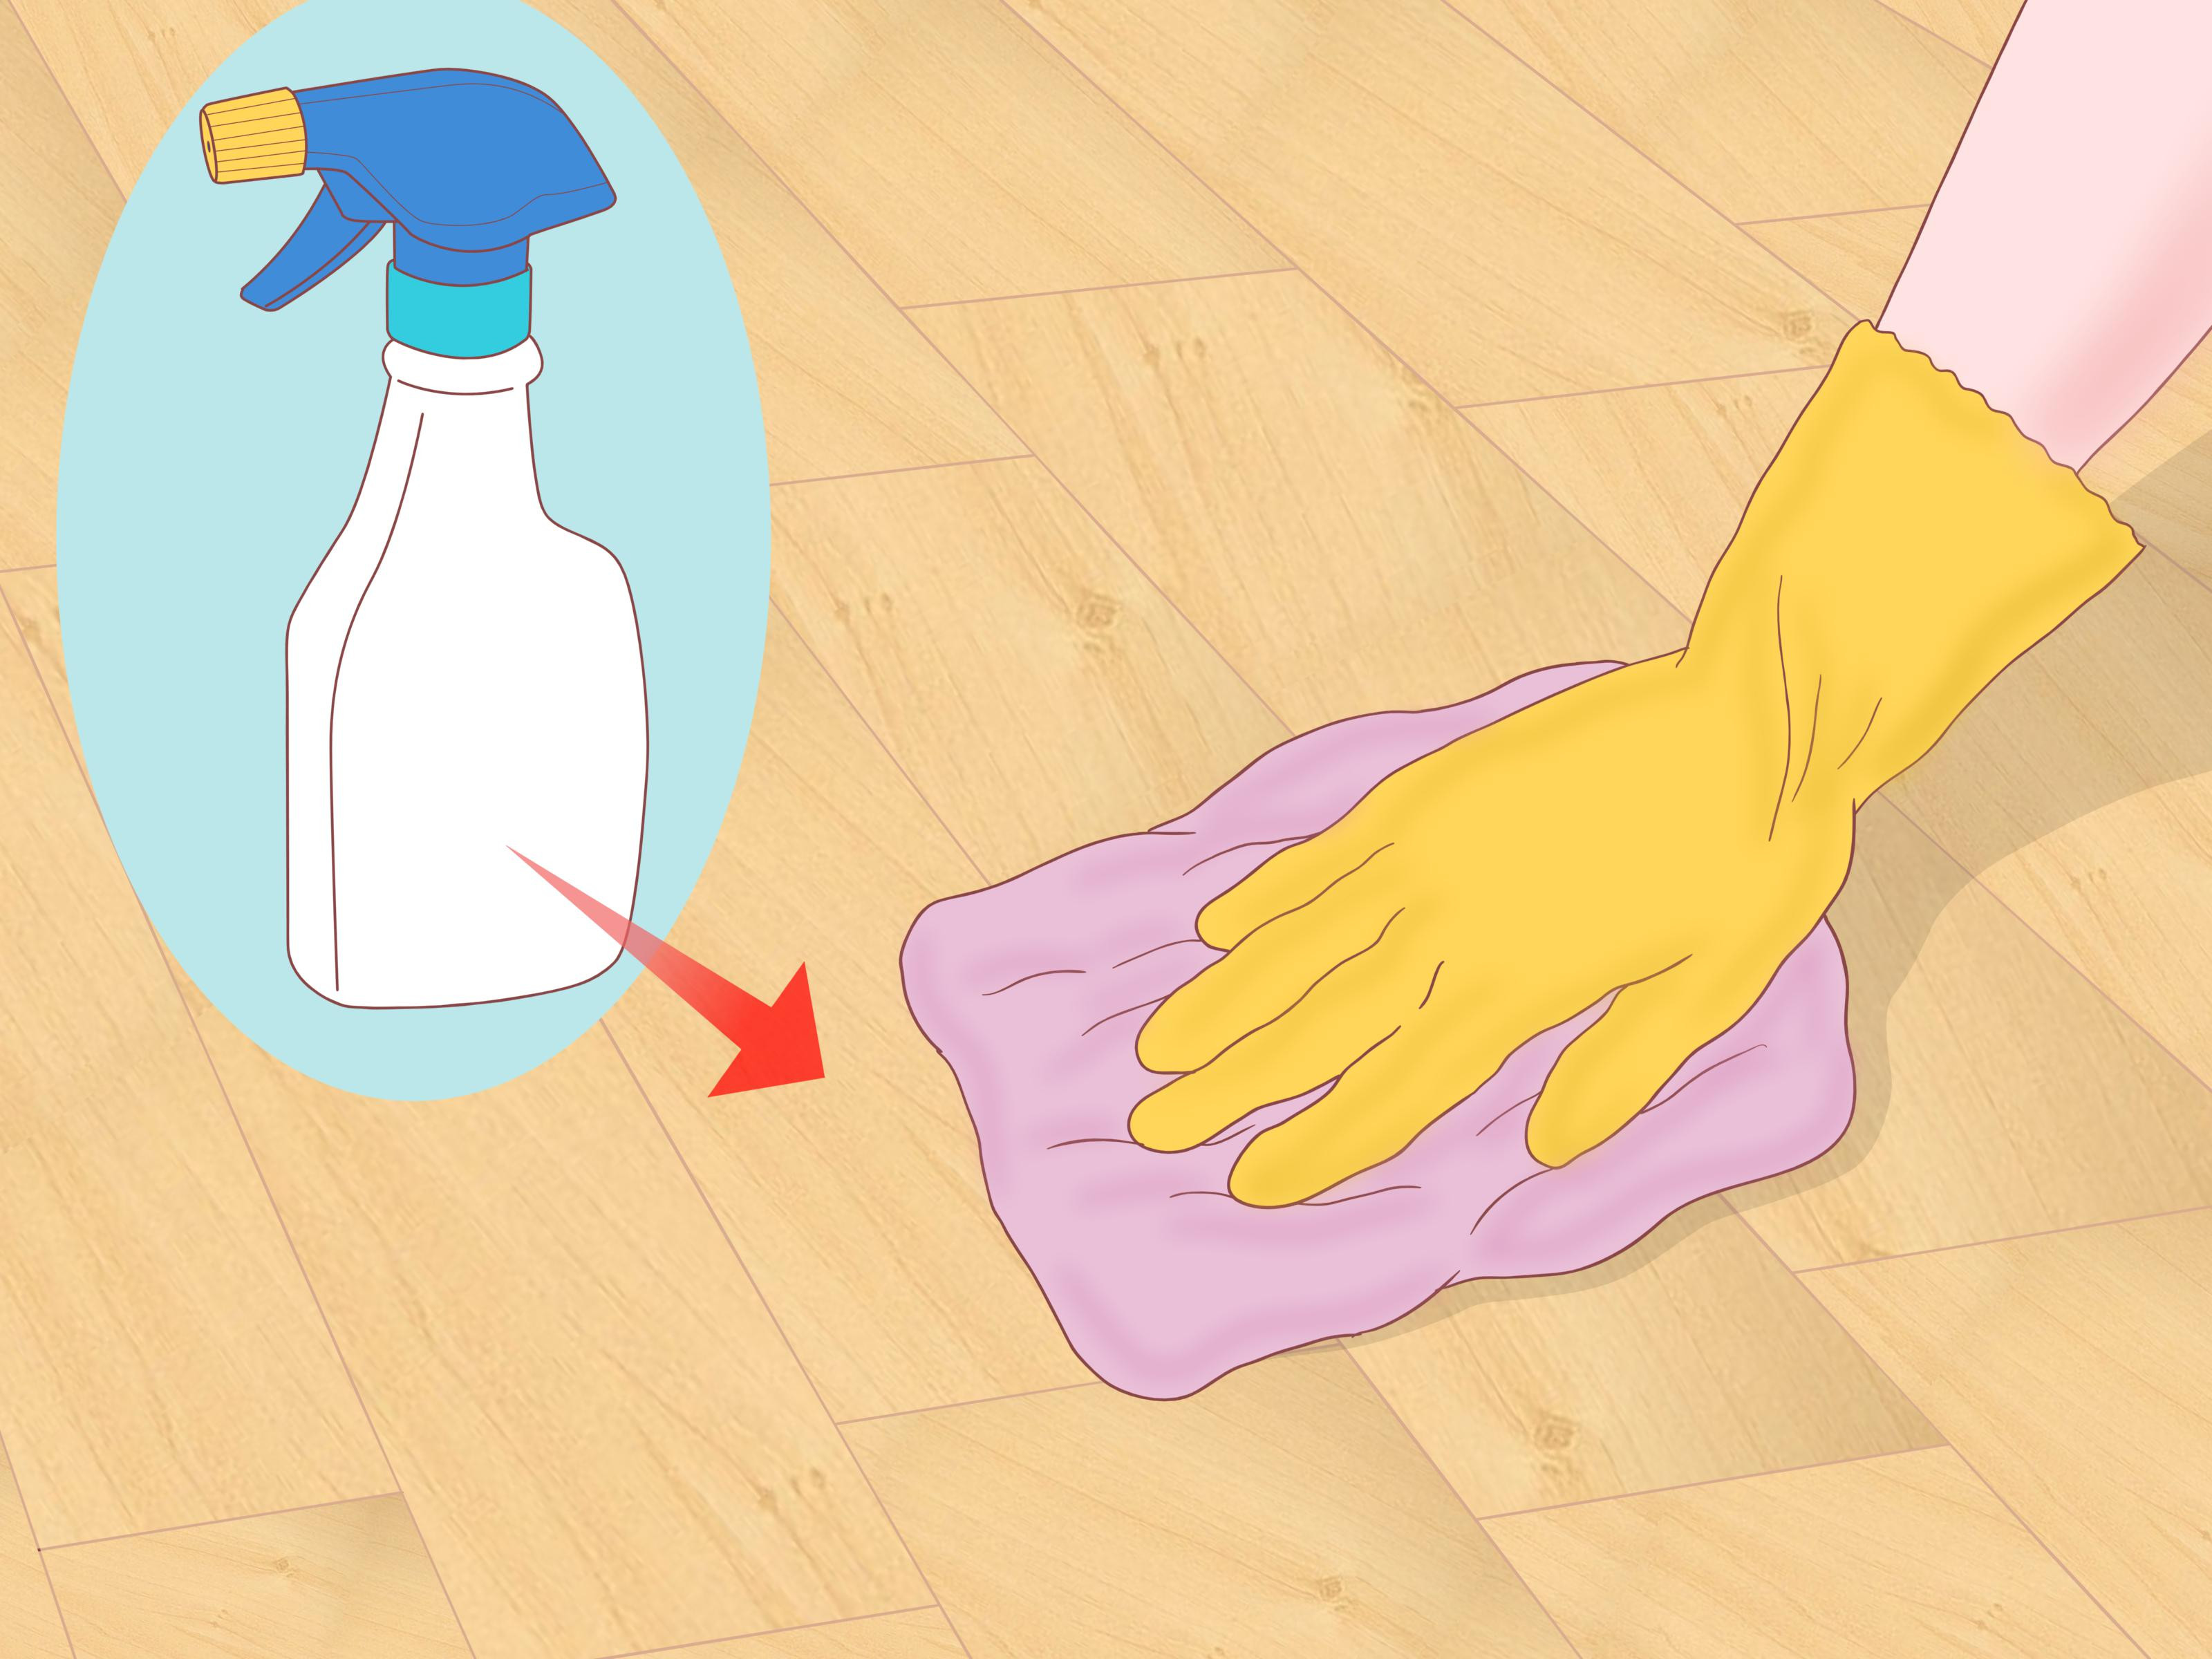 13 Popular Getting Paint Off Hardwood Floors 2022 free download getting paint off hardwood floors of 3 ways to clean parquet floors wikihow throughout clean parquet floors step 12